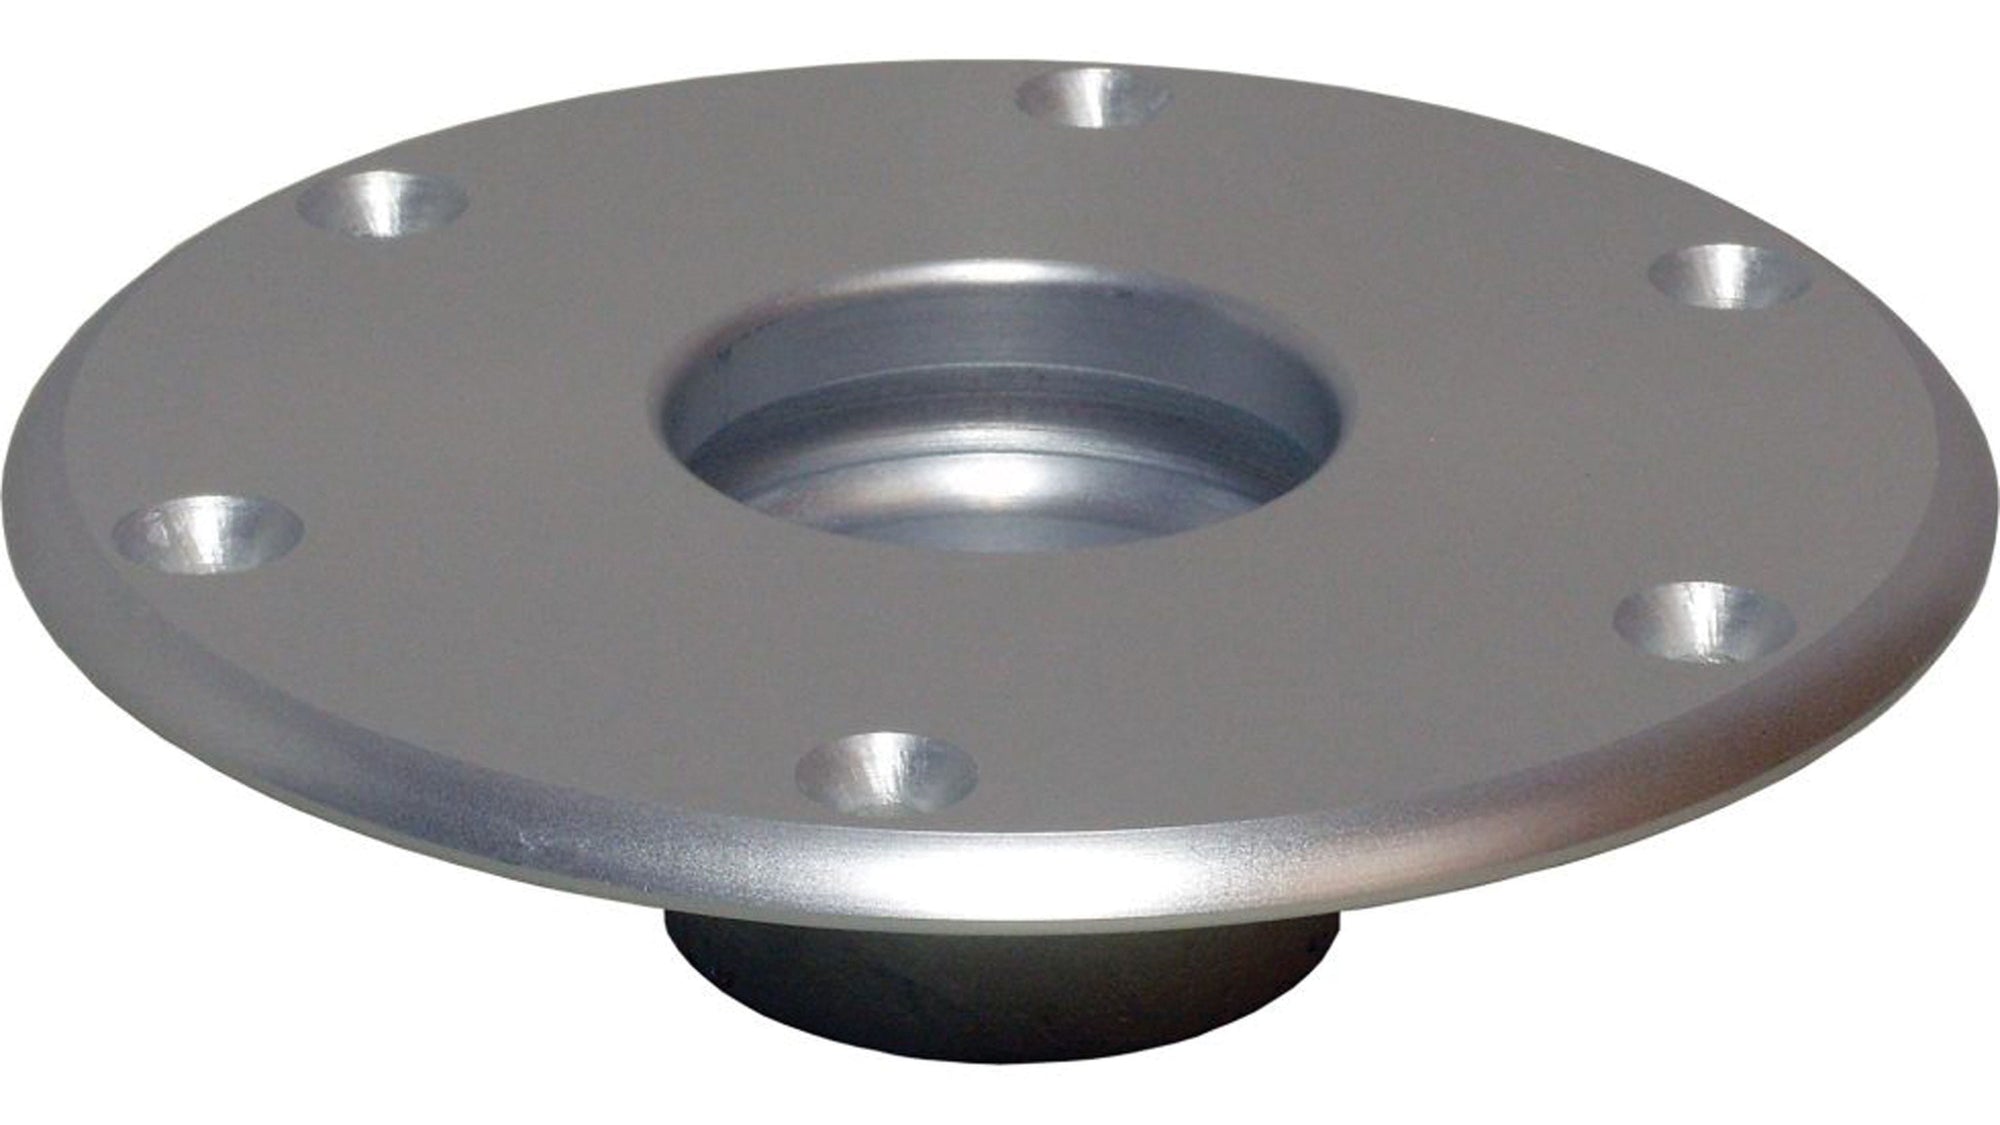 Springfield 3660107 2-7/8" Table Base - Anodized